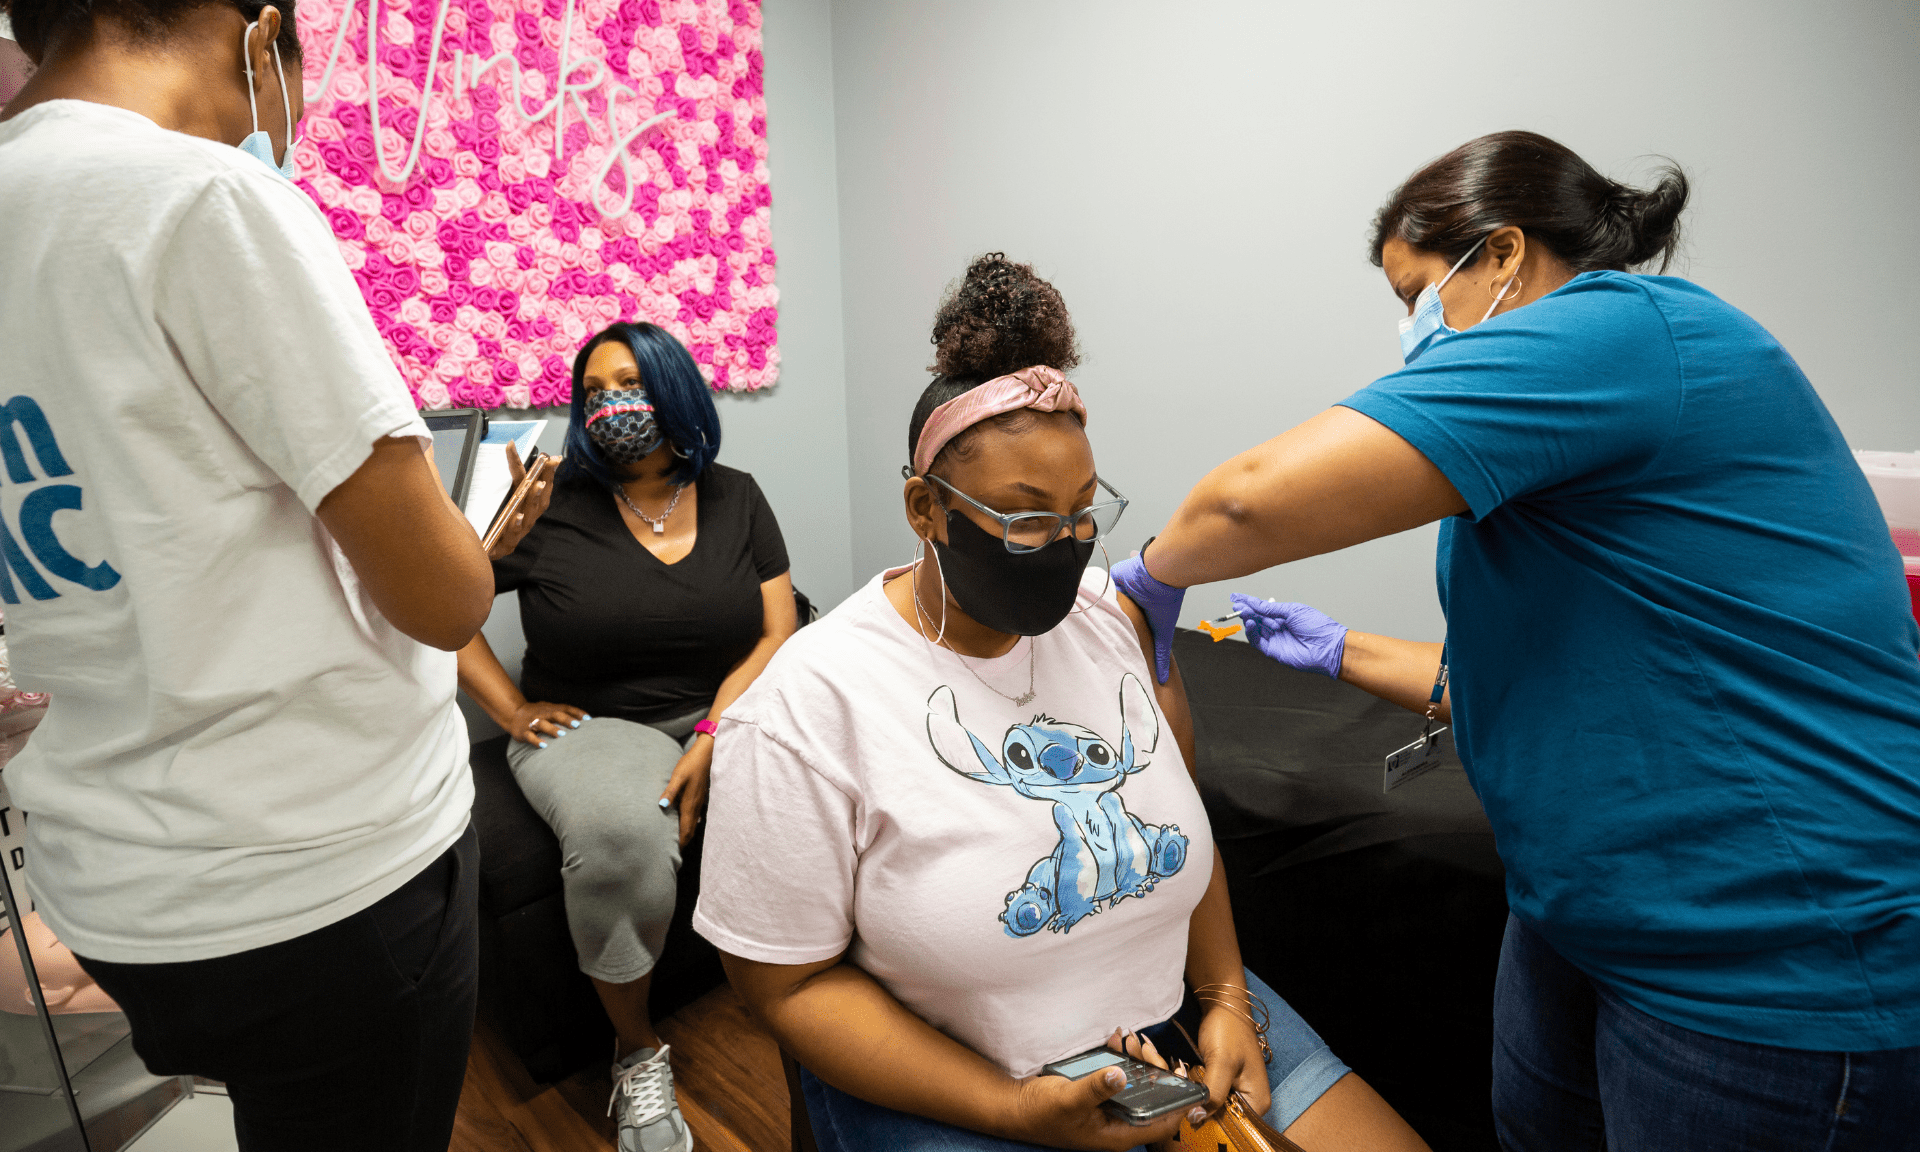 A young Black woman receives a COVID vaccine at a Black beauty salon with other women sitting nearby